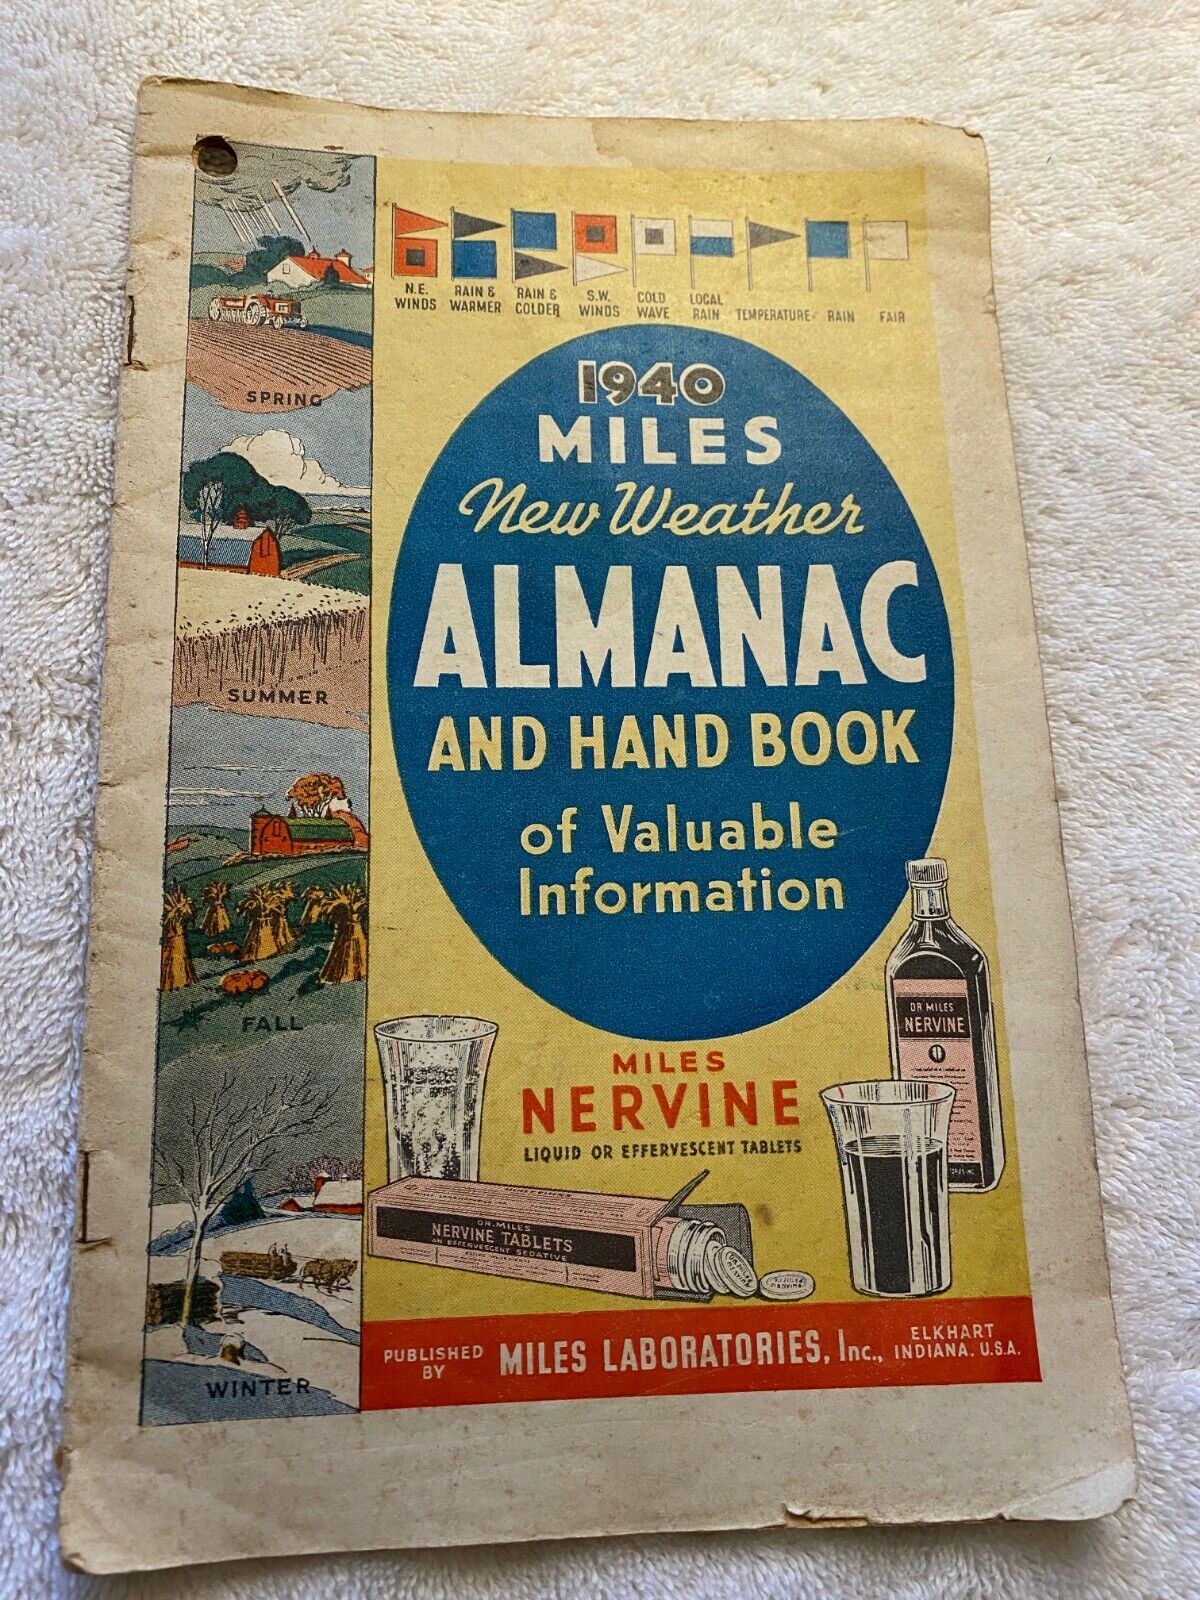  Miles Almanac 1940 New Weather Hand Book Valuable Information Nervine Tablets